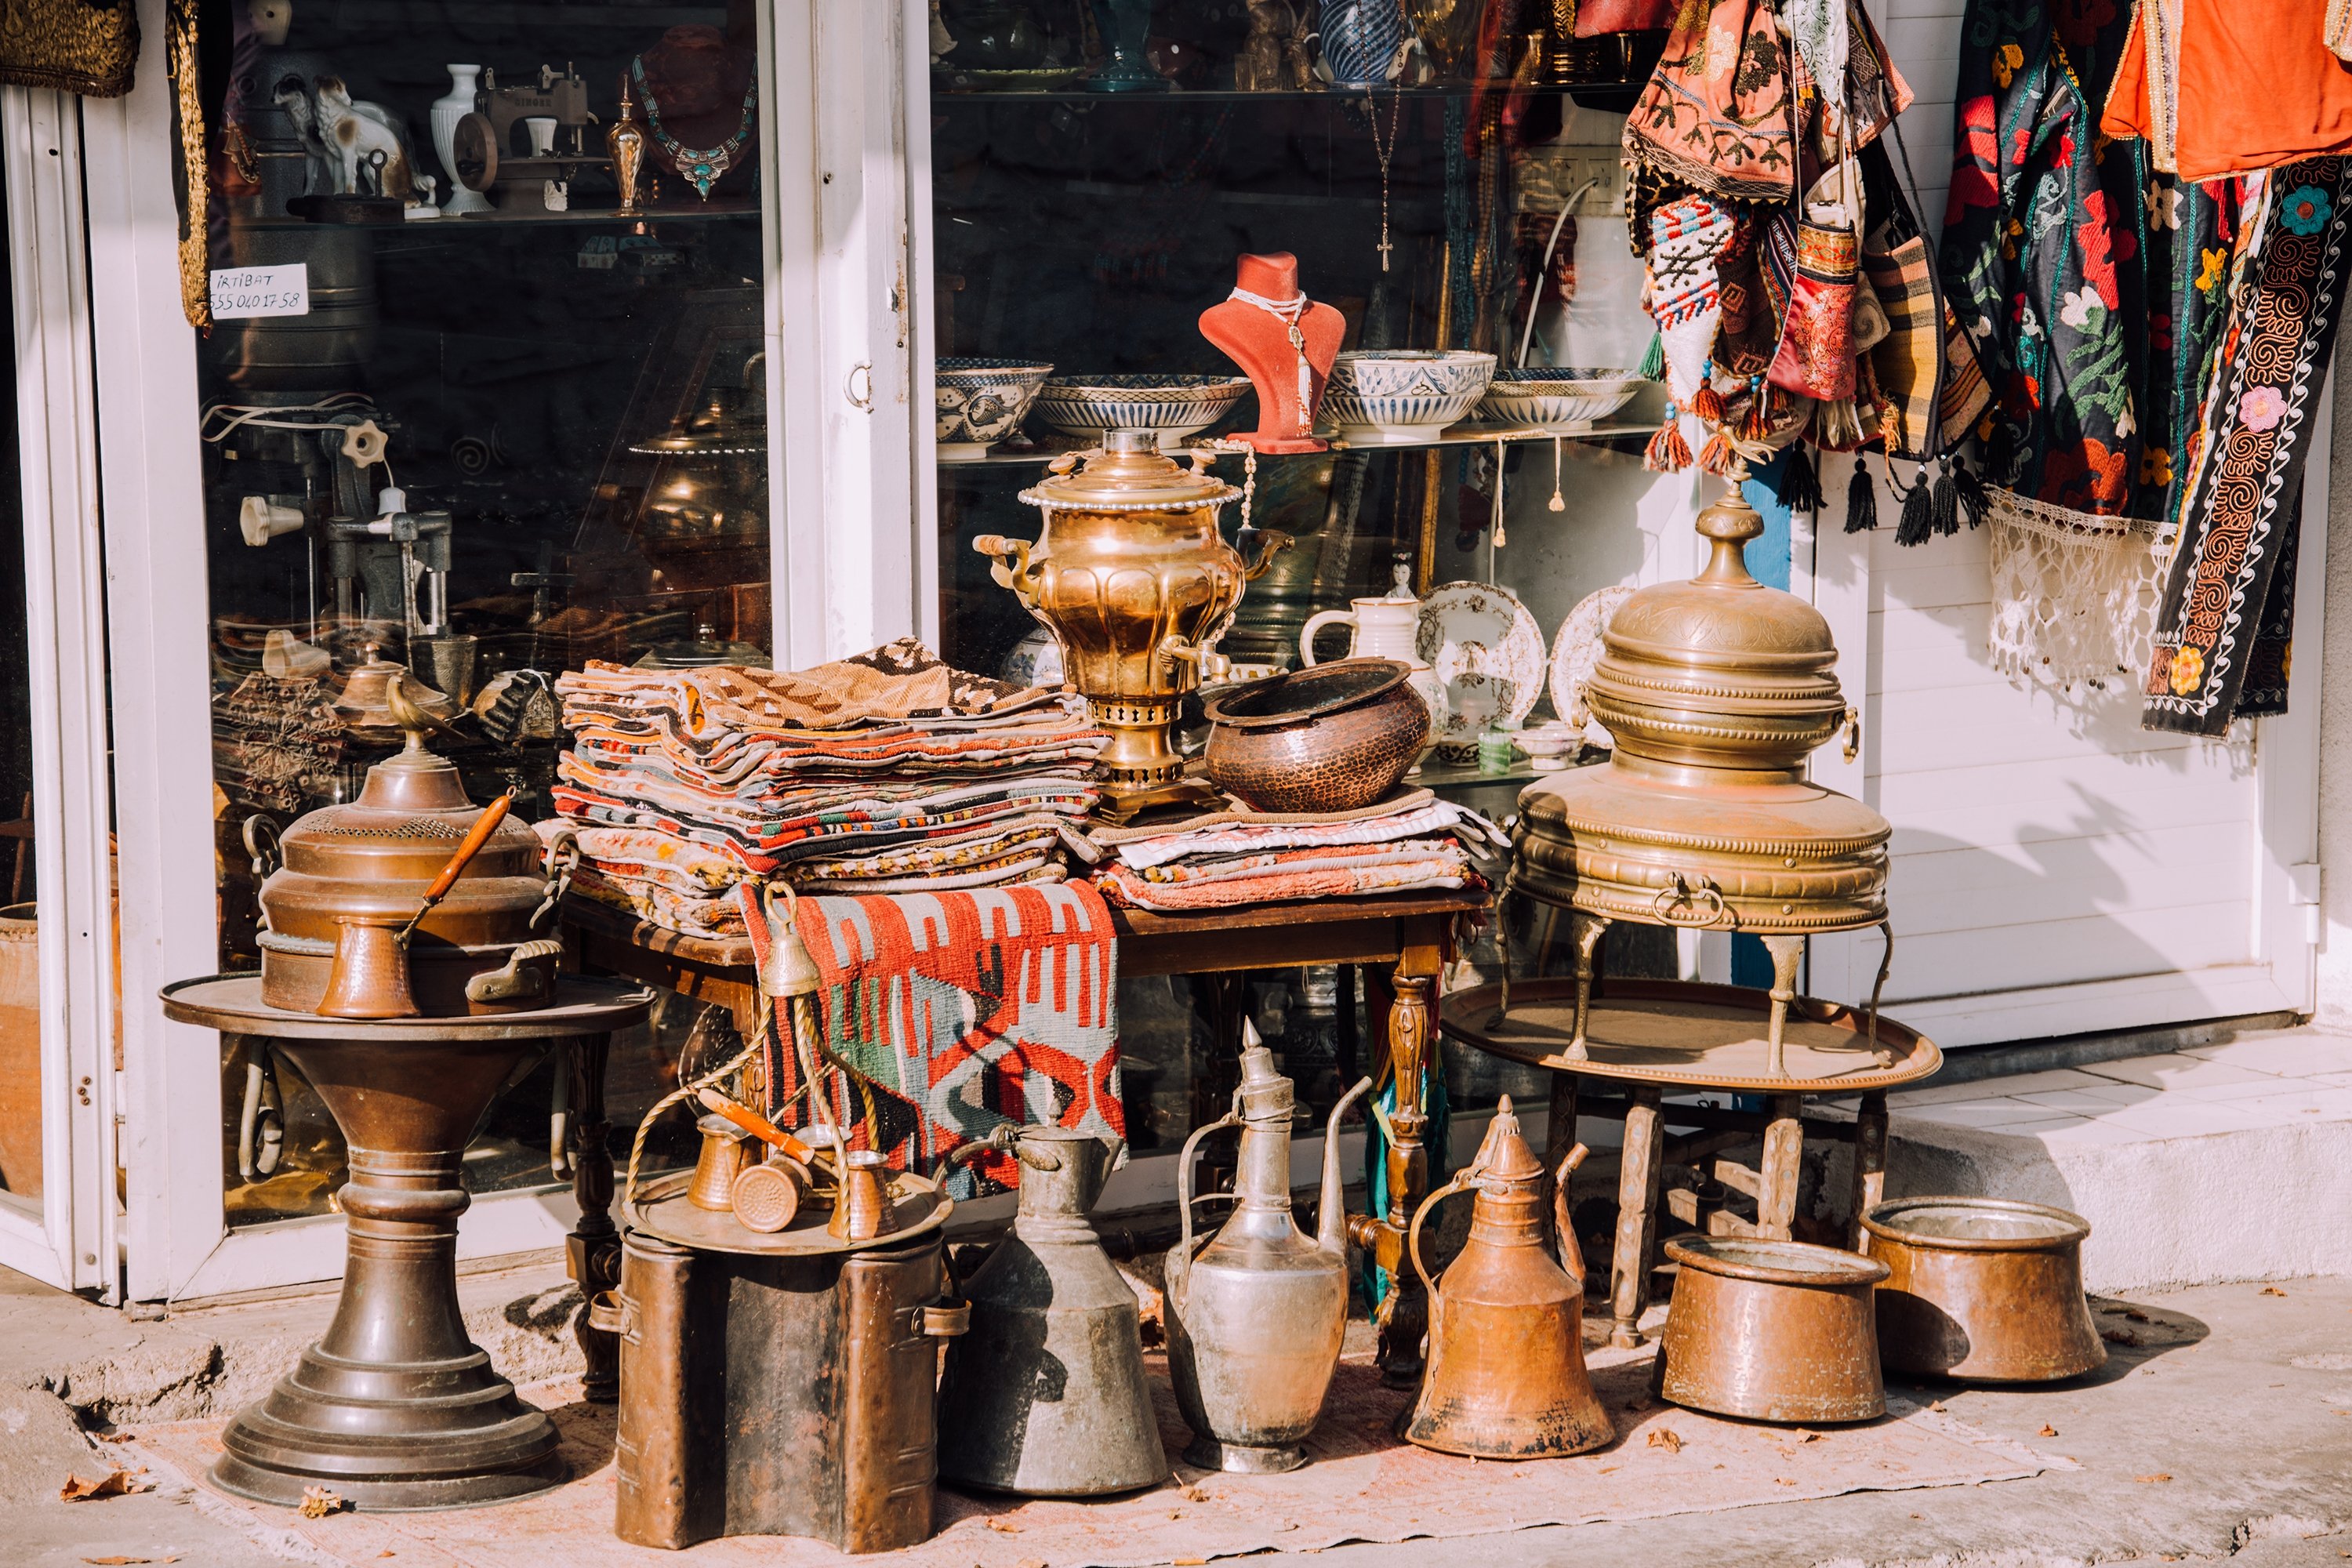 The best bargain buys in Bodrum can be found at bazaars and antique shops. (Shutterstock Photo)